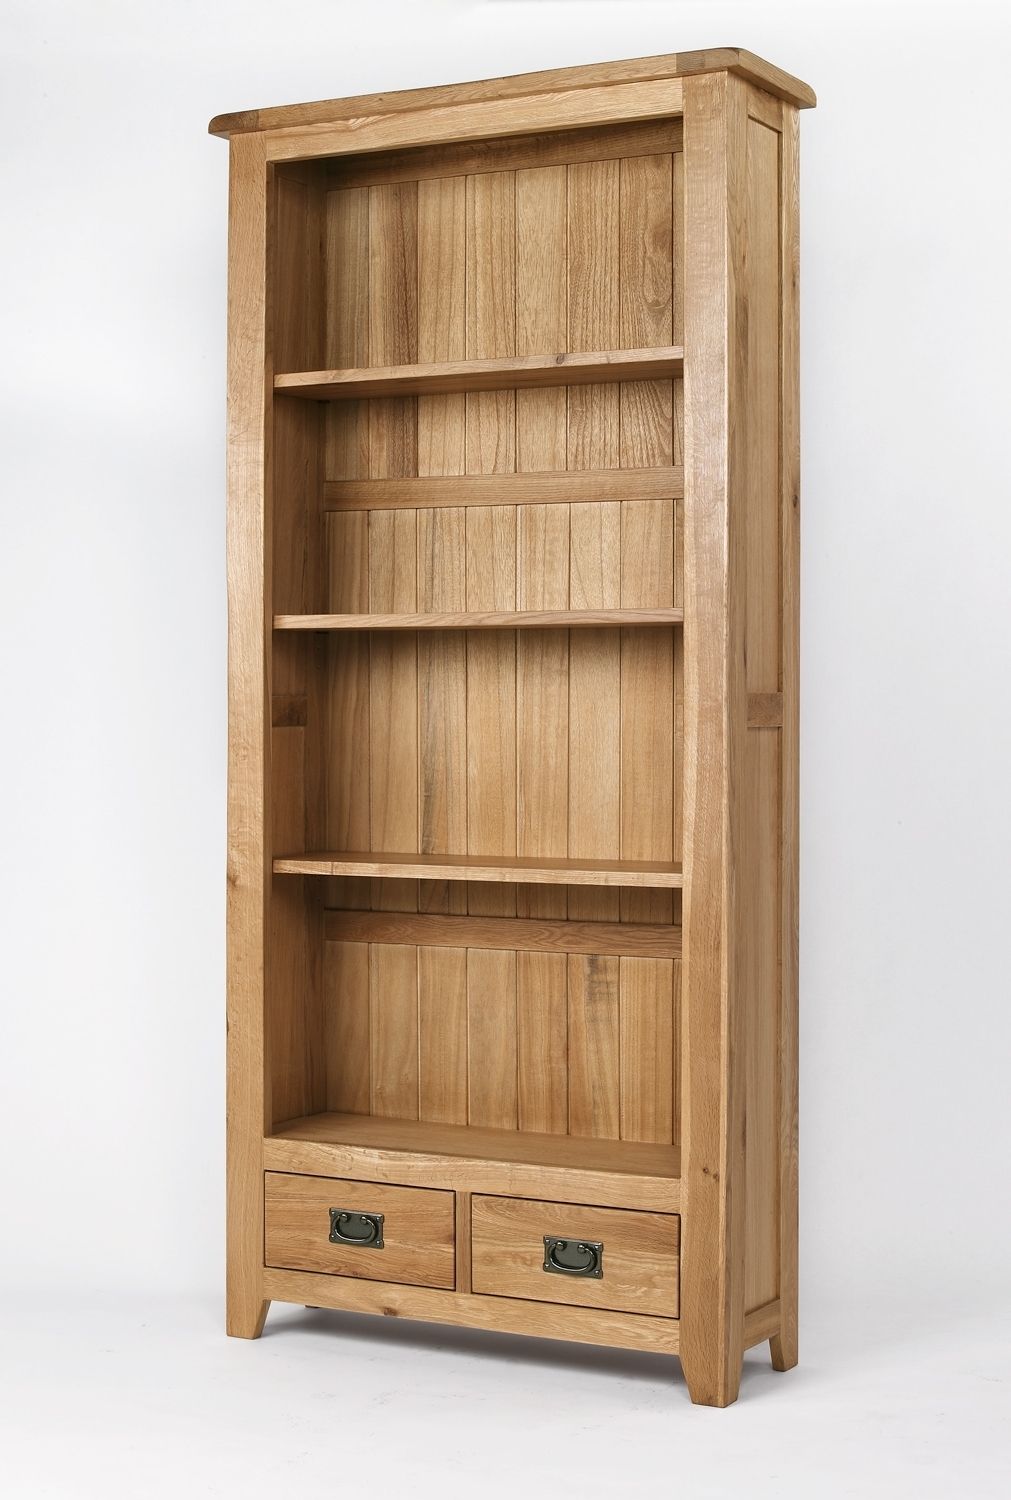 Recent Oak Bookshelves Intended For Bookcases Ideas: Most Affordable Wood Bookcase Solid Wood (View 10 of 15)